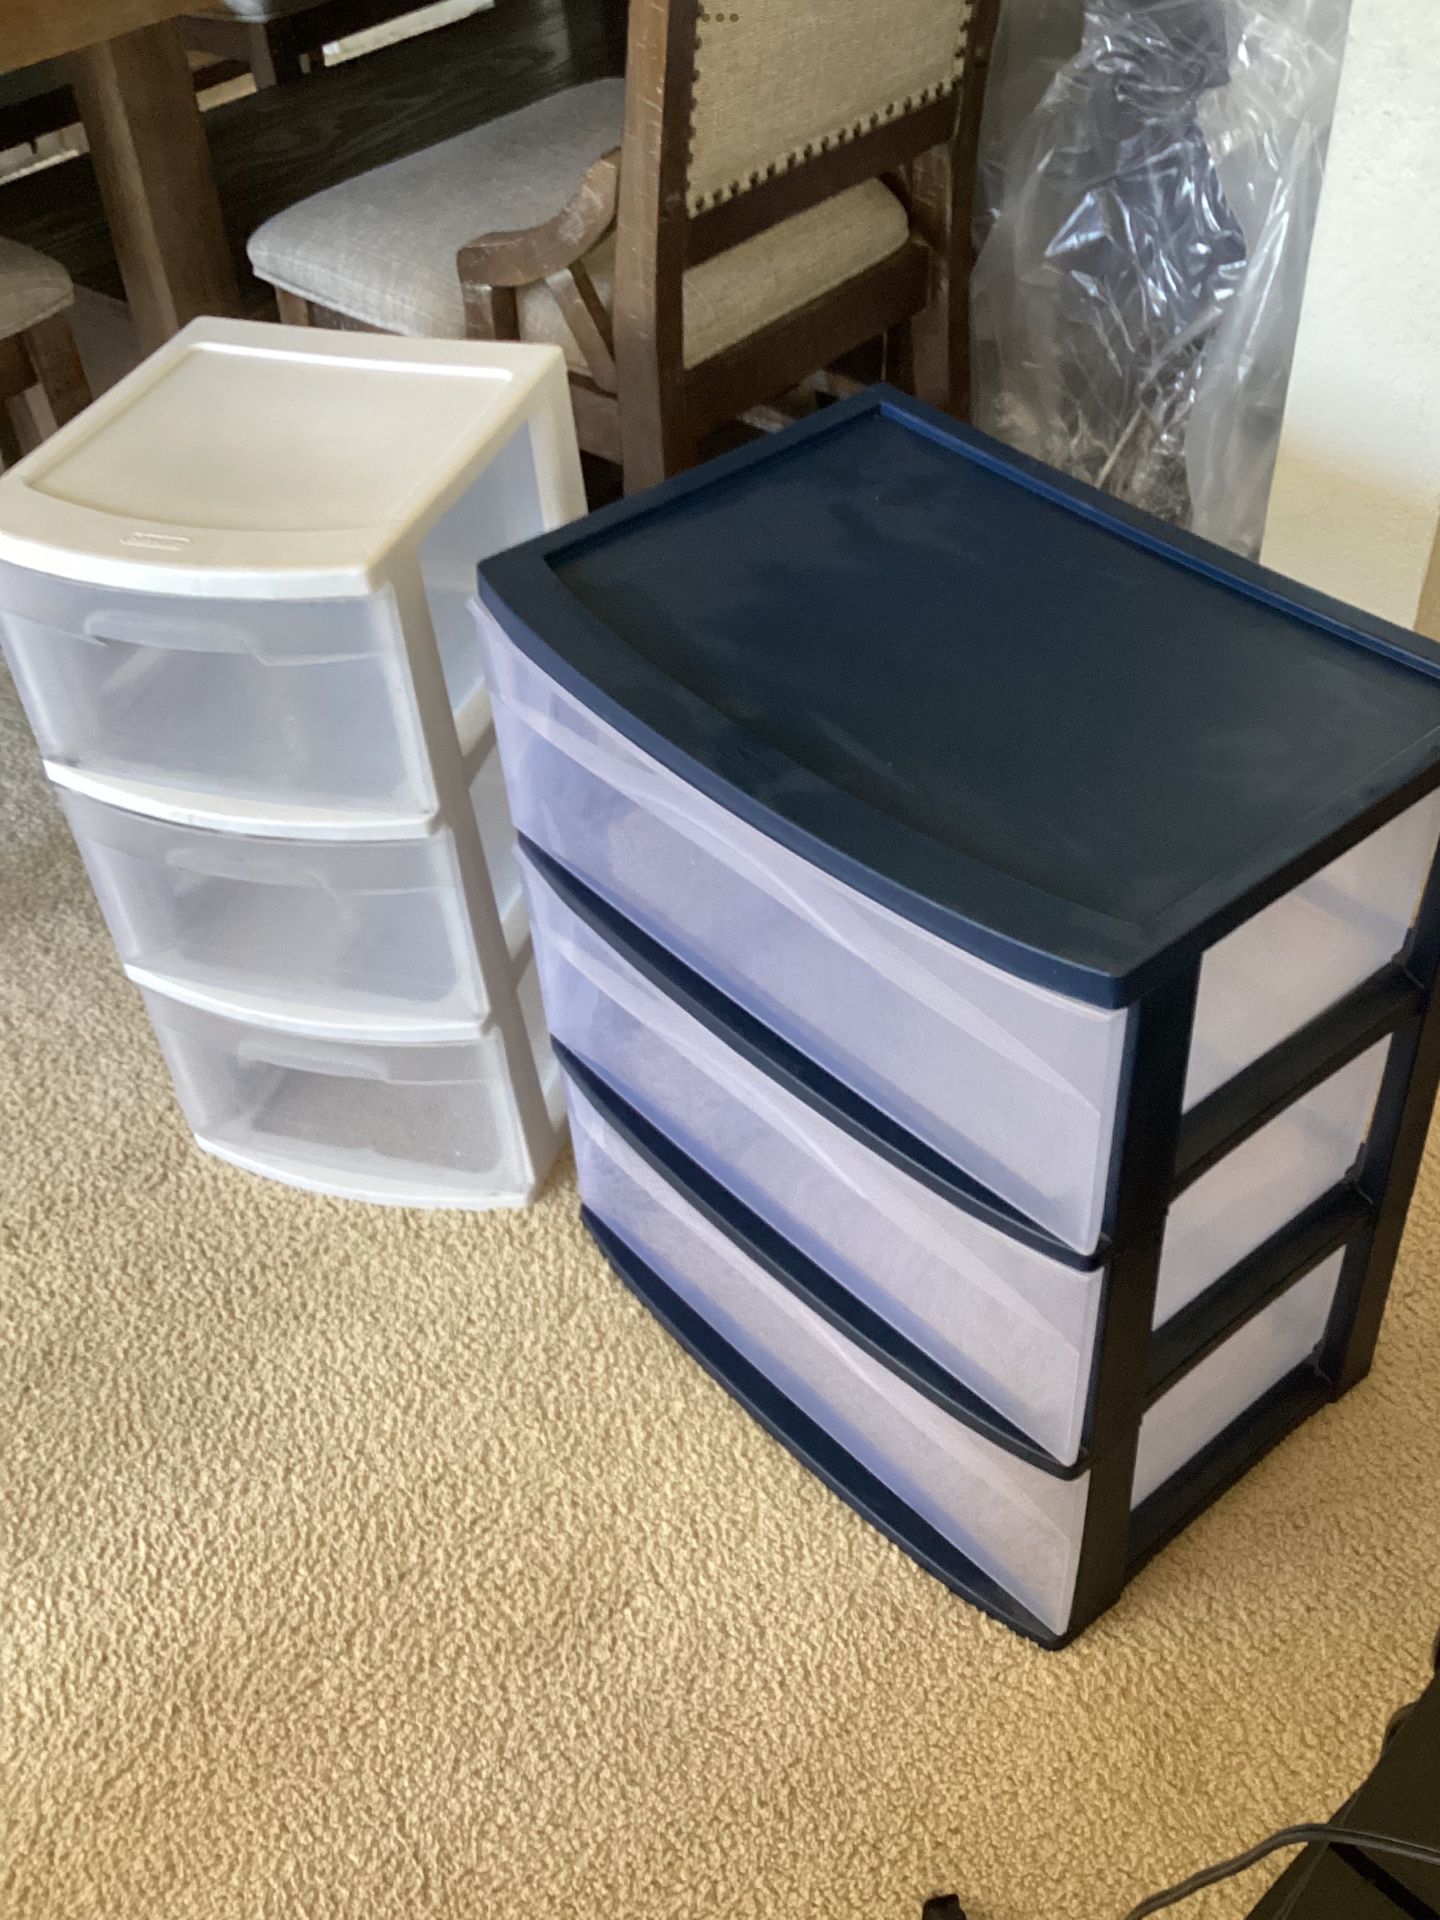 Storage Like Very Good Both For $15